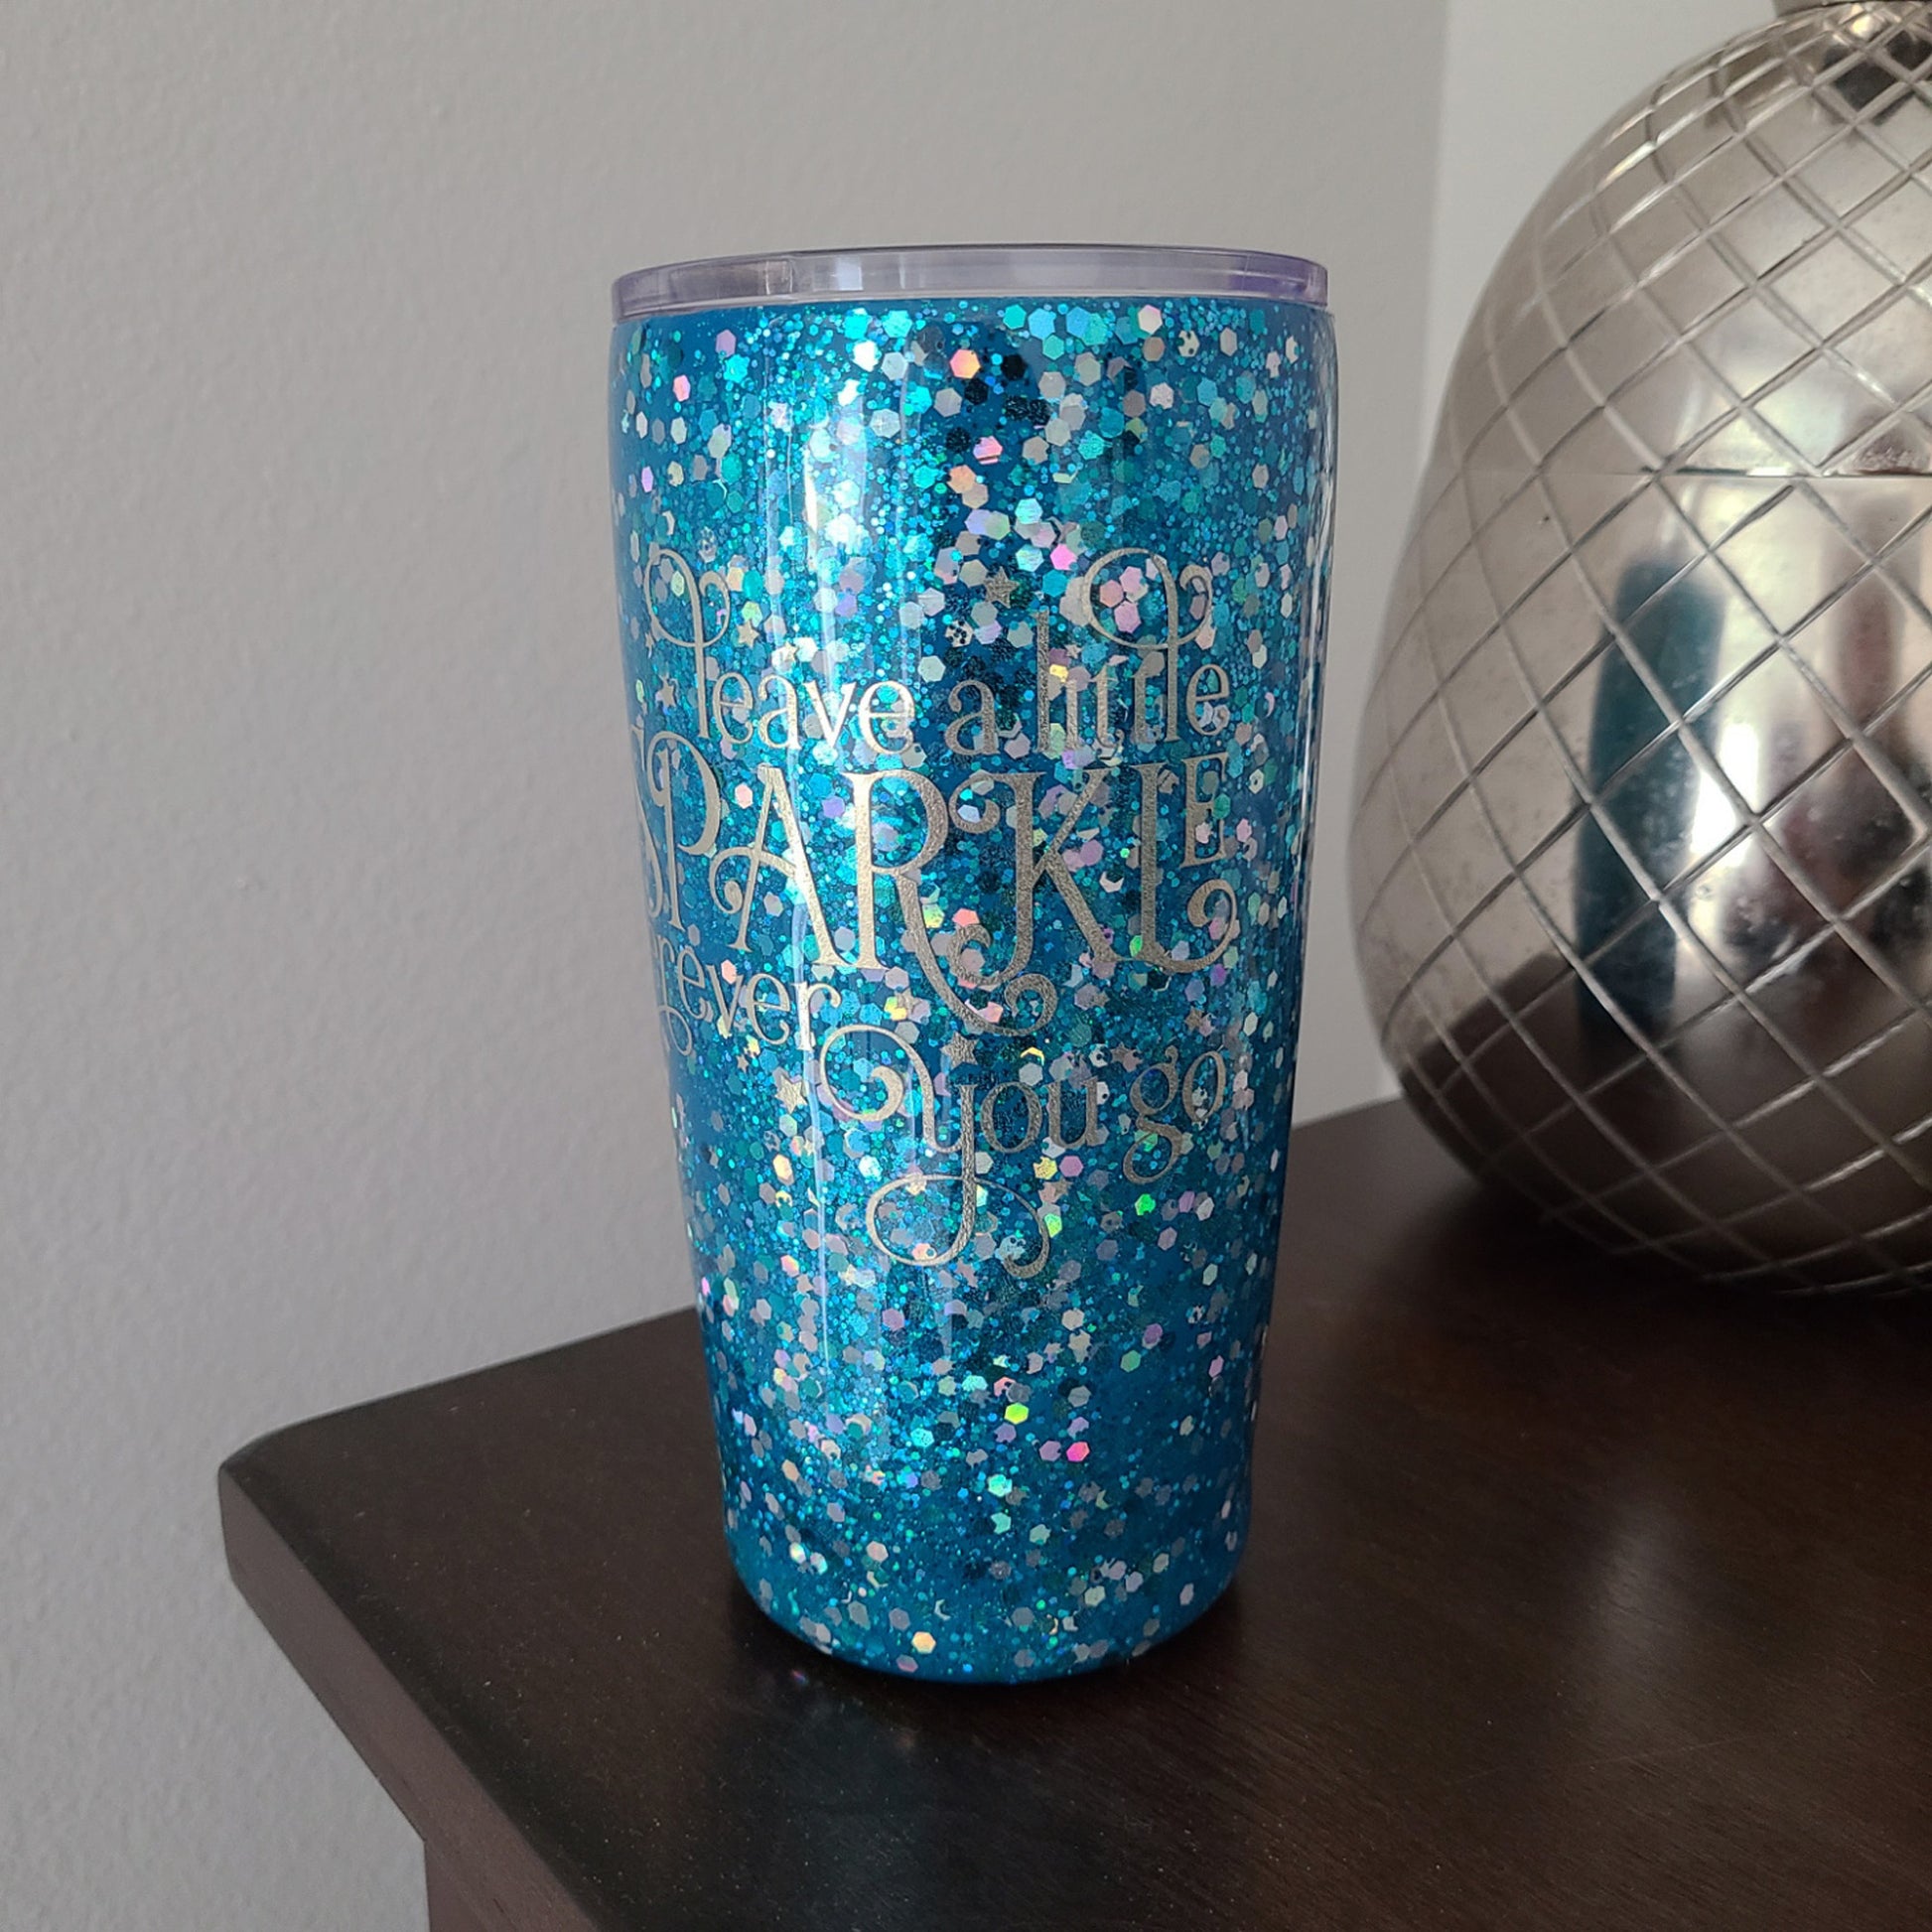 The Get Out and Go Series Tumbler